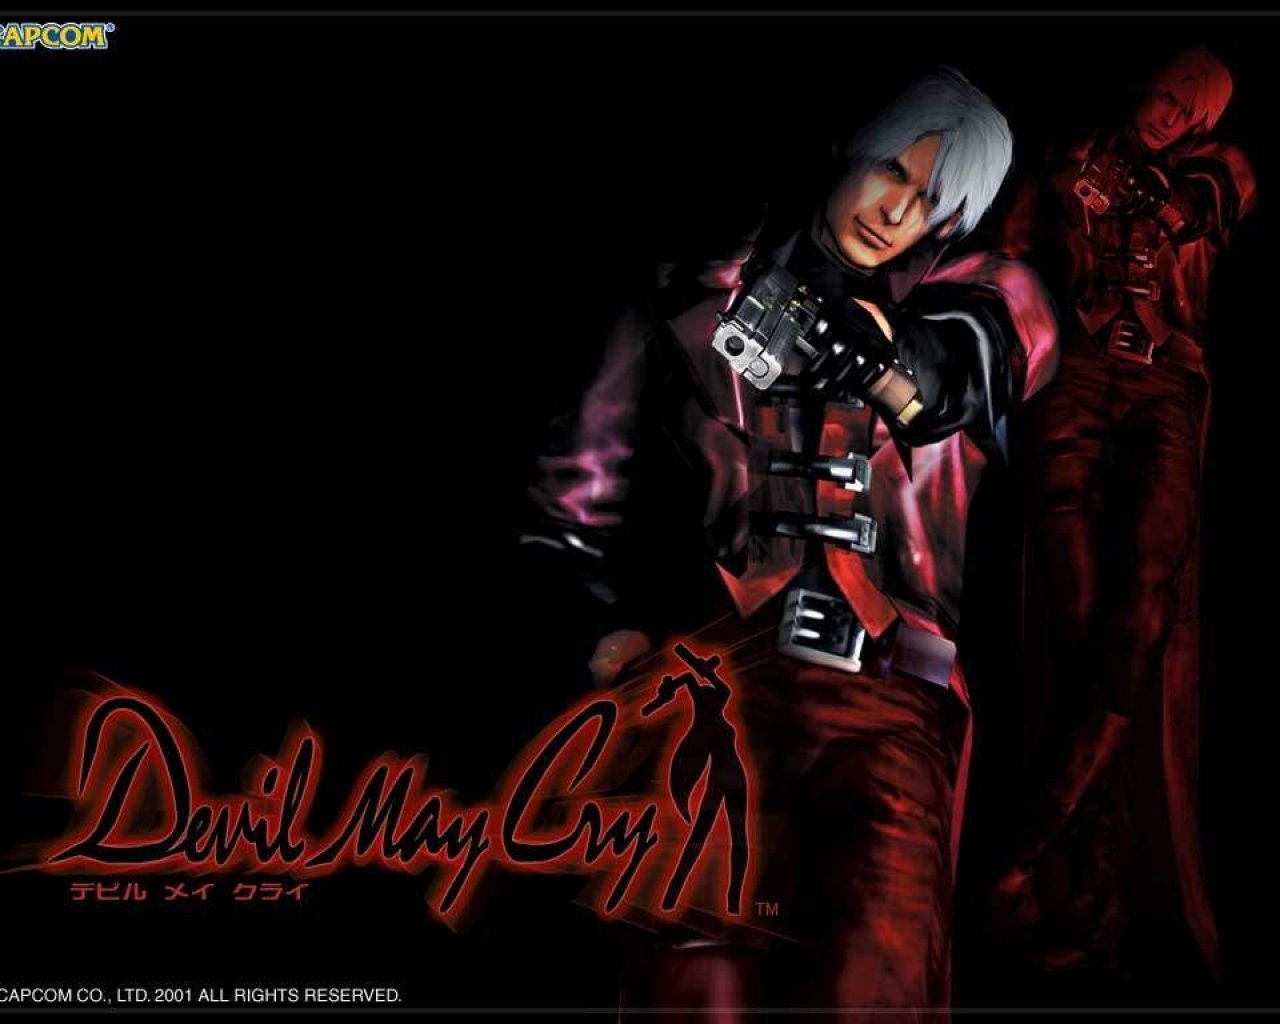 Devil may cry 4 windows 7 themes download